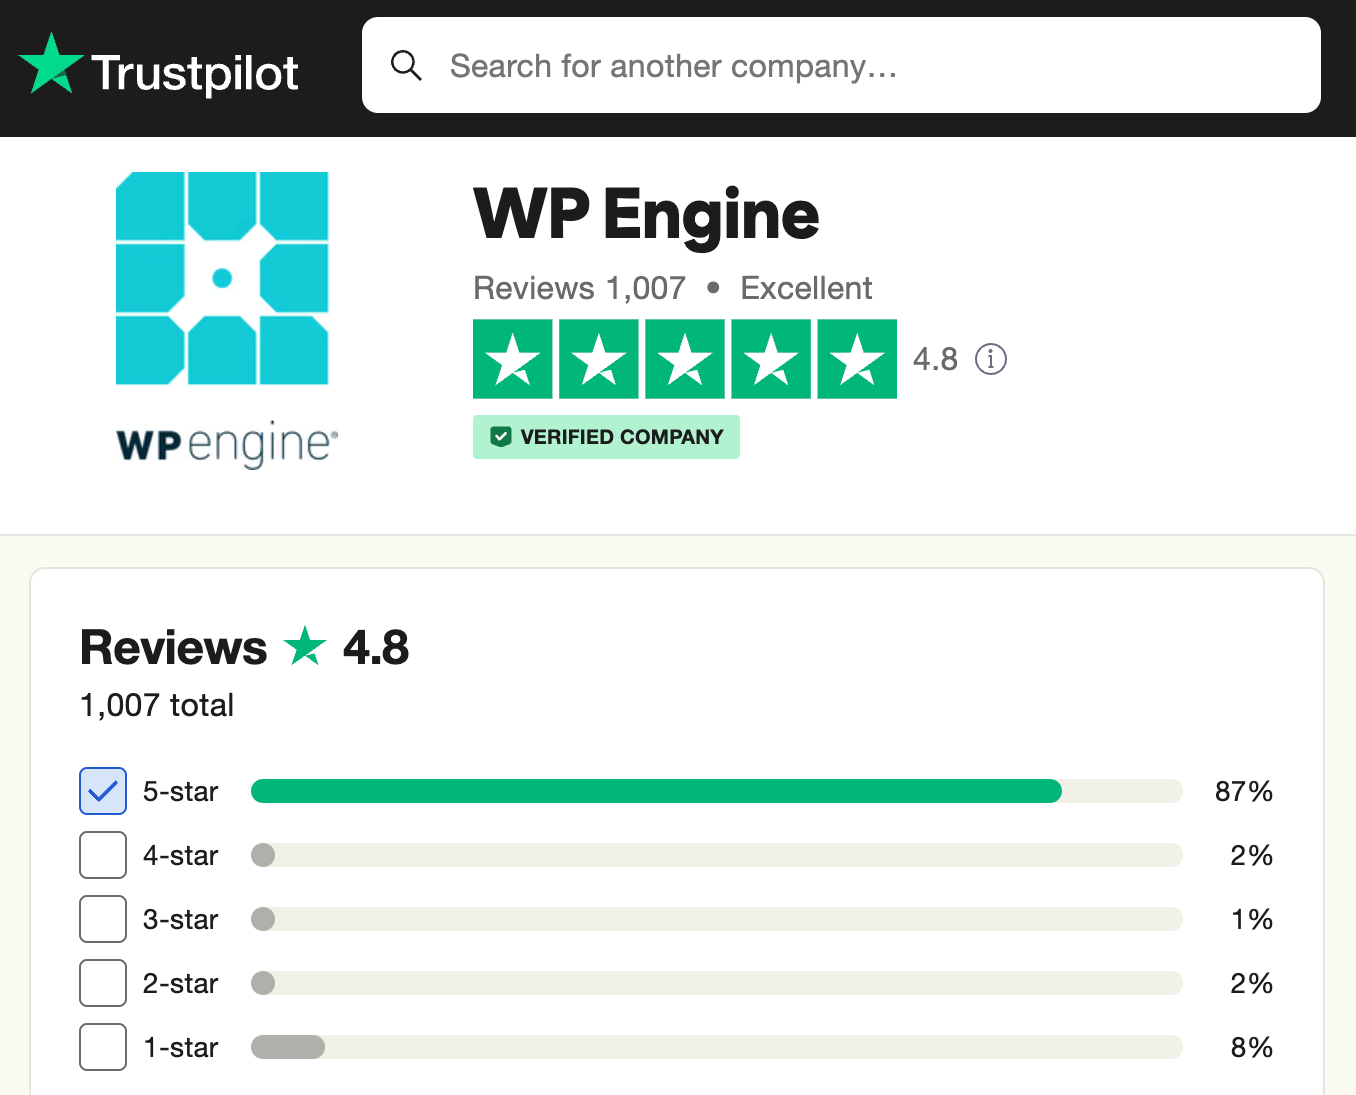 87% of 1007 Trustpilot reviews are 5-star